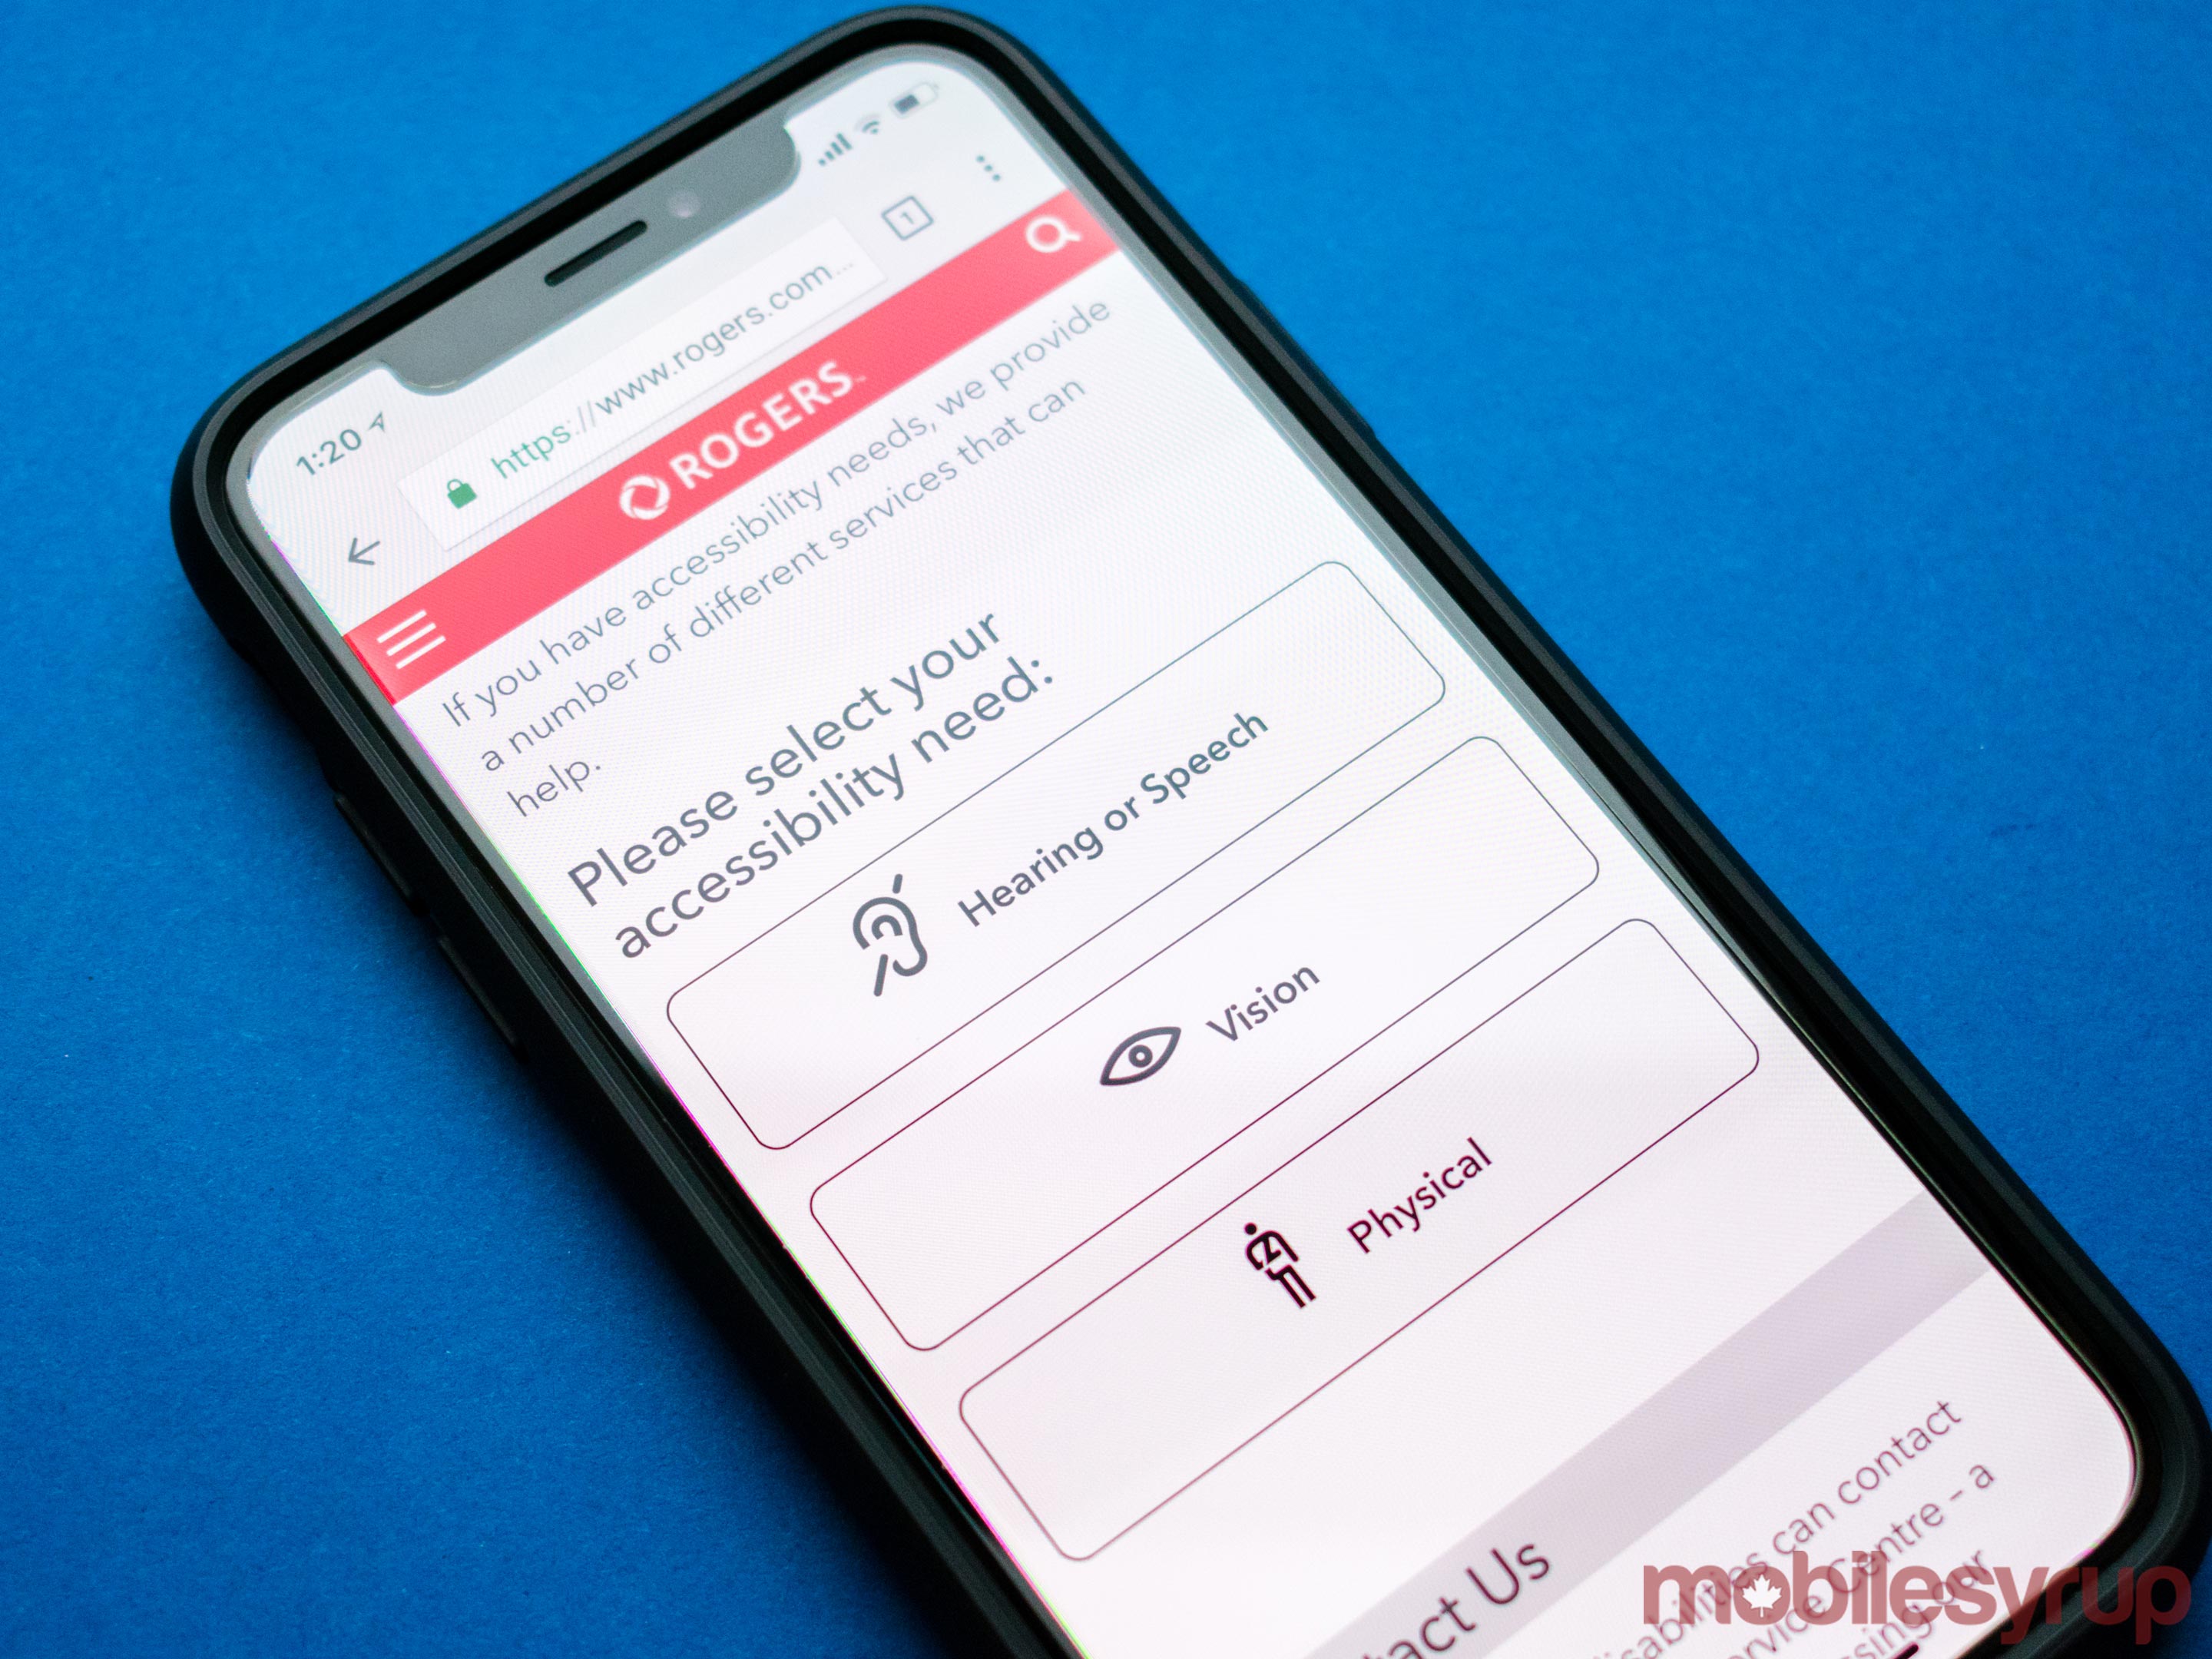 The Rogers Wireless accessibility services page on an iPhone X